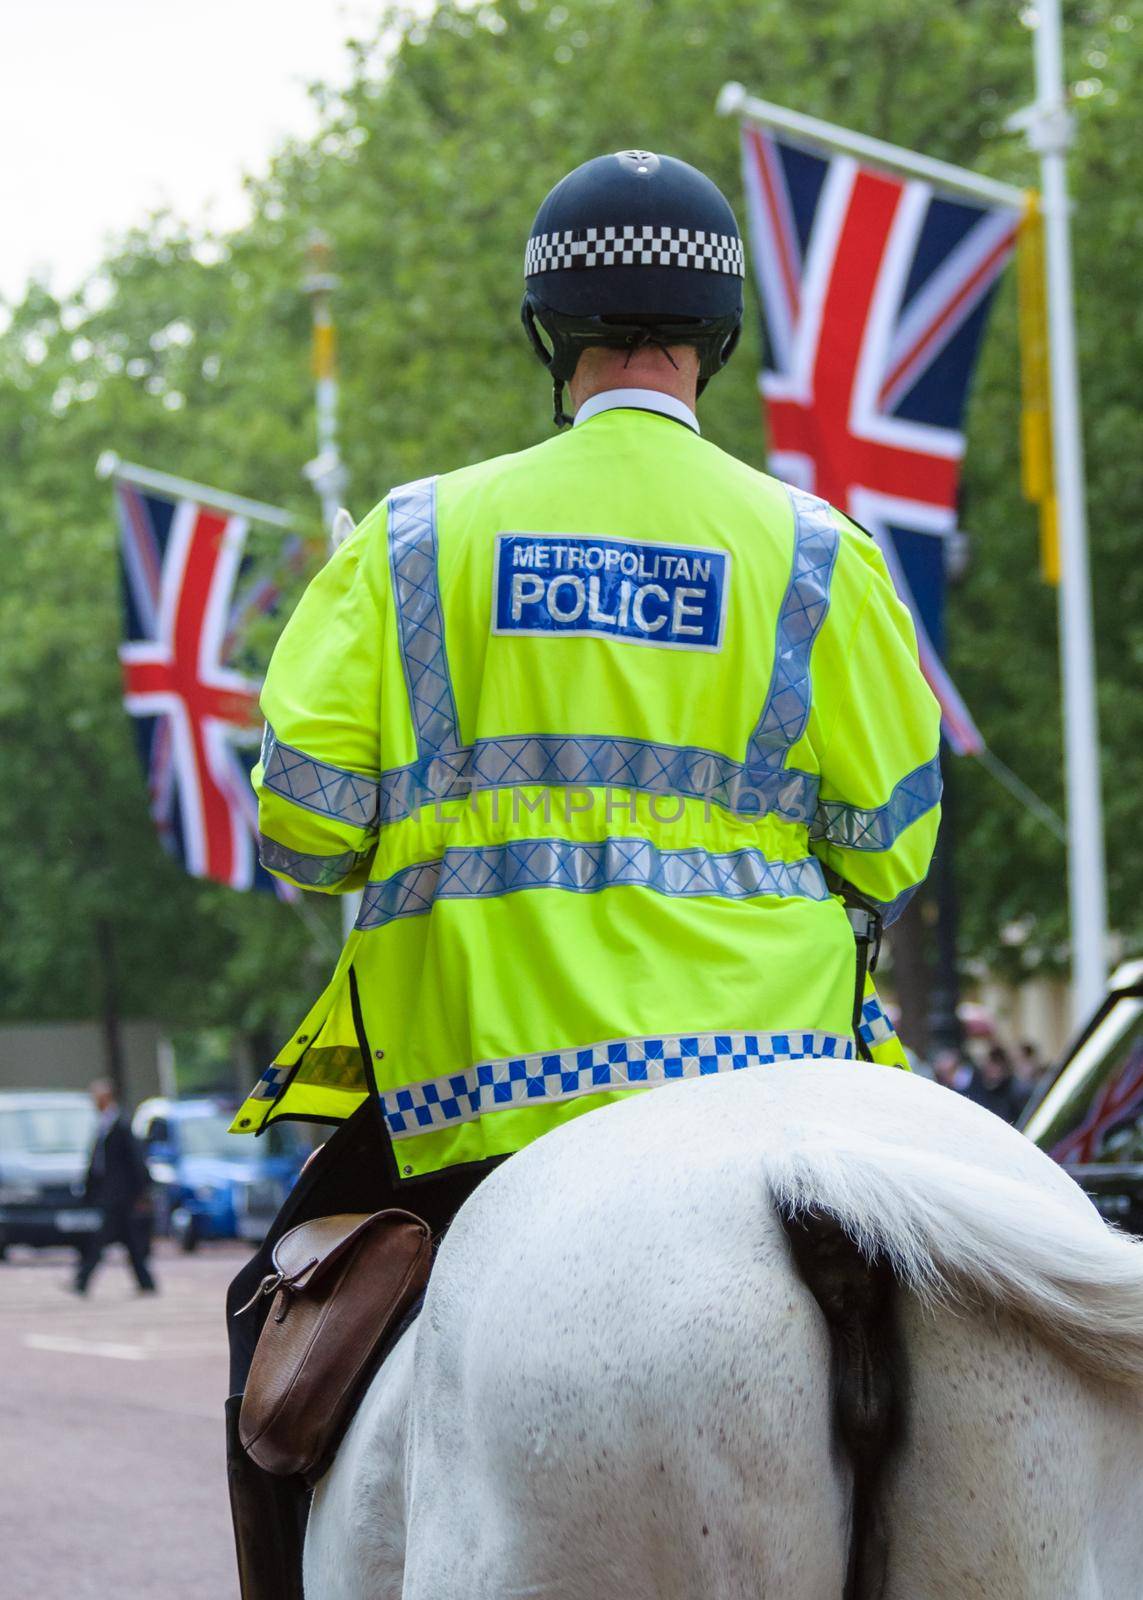 Mounted police officer in London, England, UK by dutourdumonde